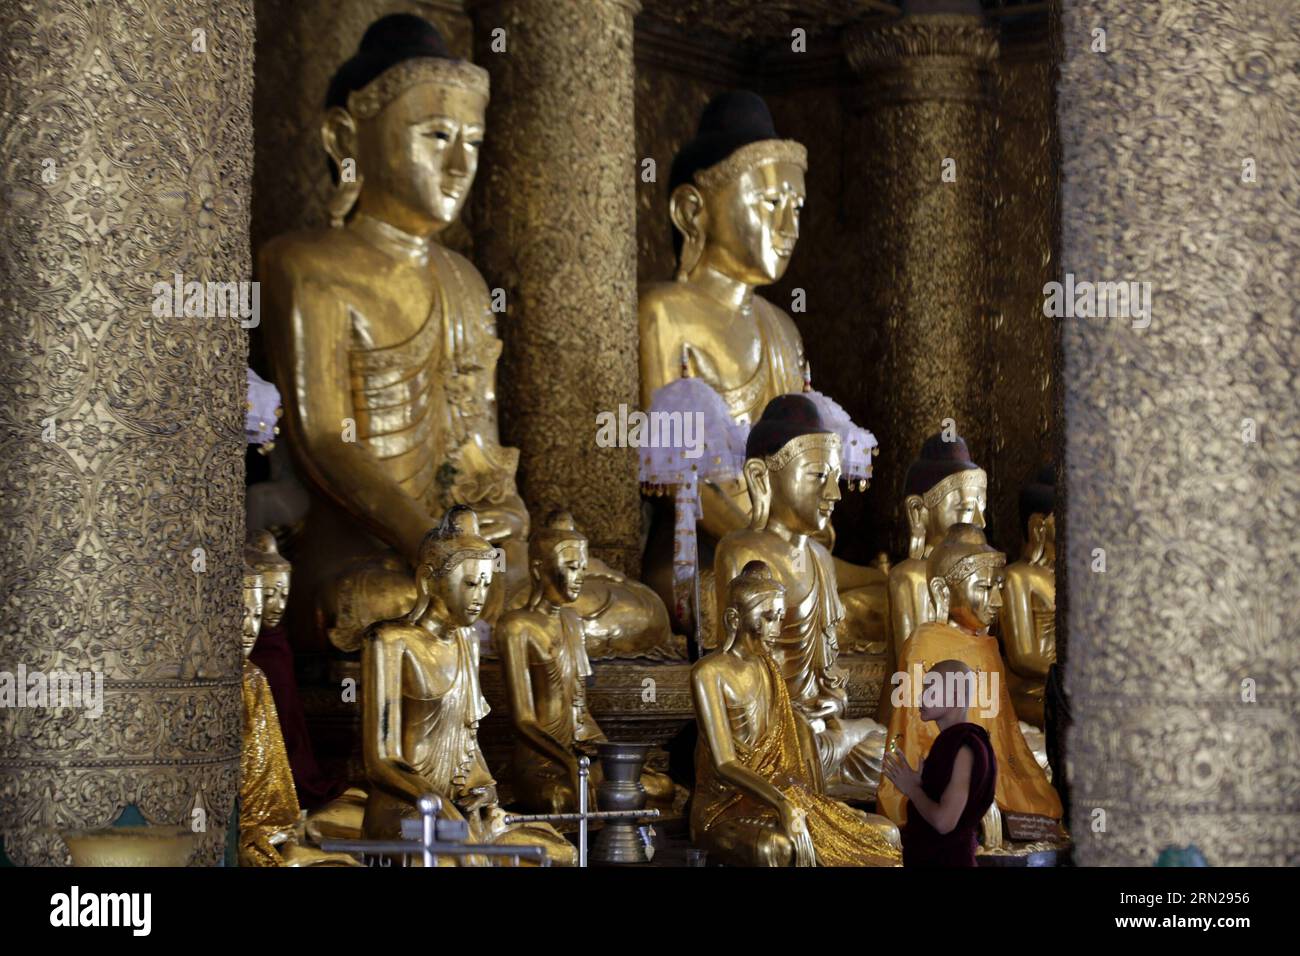 YANGON, Feb. 17, 2015 -- A Buddhist novice pays homage at the Shwedagon pagoda in Yangon, Myanmar, Feb. 17, 2015. Shwedagon Pagoda is a repository of the best of Myanmar s heritages -- architecture, sculpture and arts. It consists of hundreds of colorful temples, stupas and statues that reflect architectural styles spanning almost 2,500 years. ) MYANMAR-YANGON-SHWEDAGON PAGODA UxAung PUBLICATIONxNOTxINxCHN   Yangon Feb 17 2015 a Buddhist novice Pays Homage AT The Shwedagon Pagoda in Yangon Myanmar Feb 17 2015 Shwedagon Pagoda IS a repository of The Best of Myanmar S heritage Architecture Sculp Stock Photo